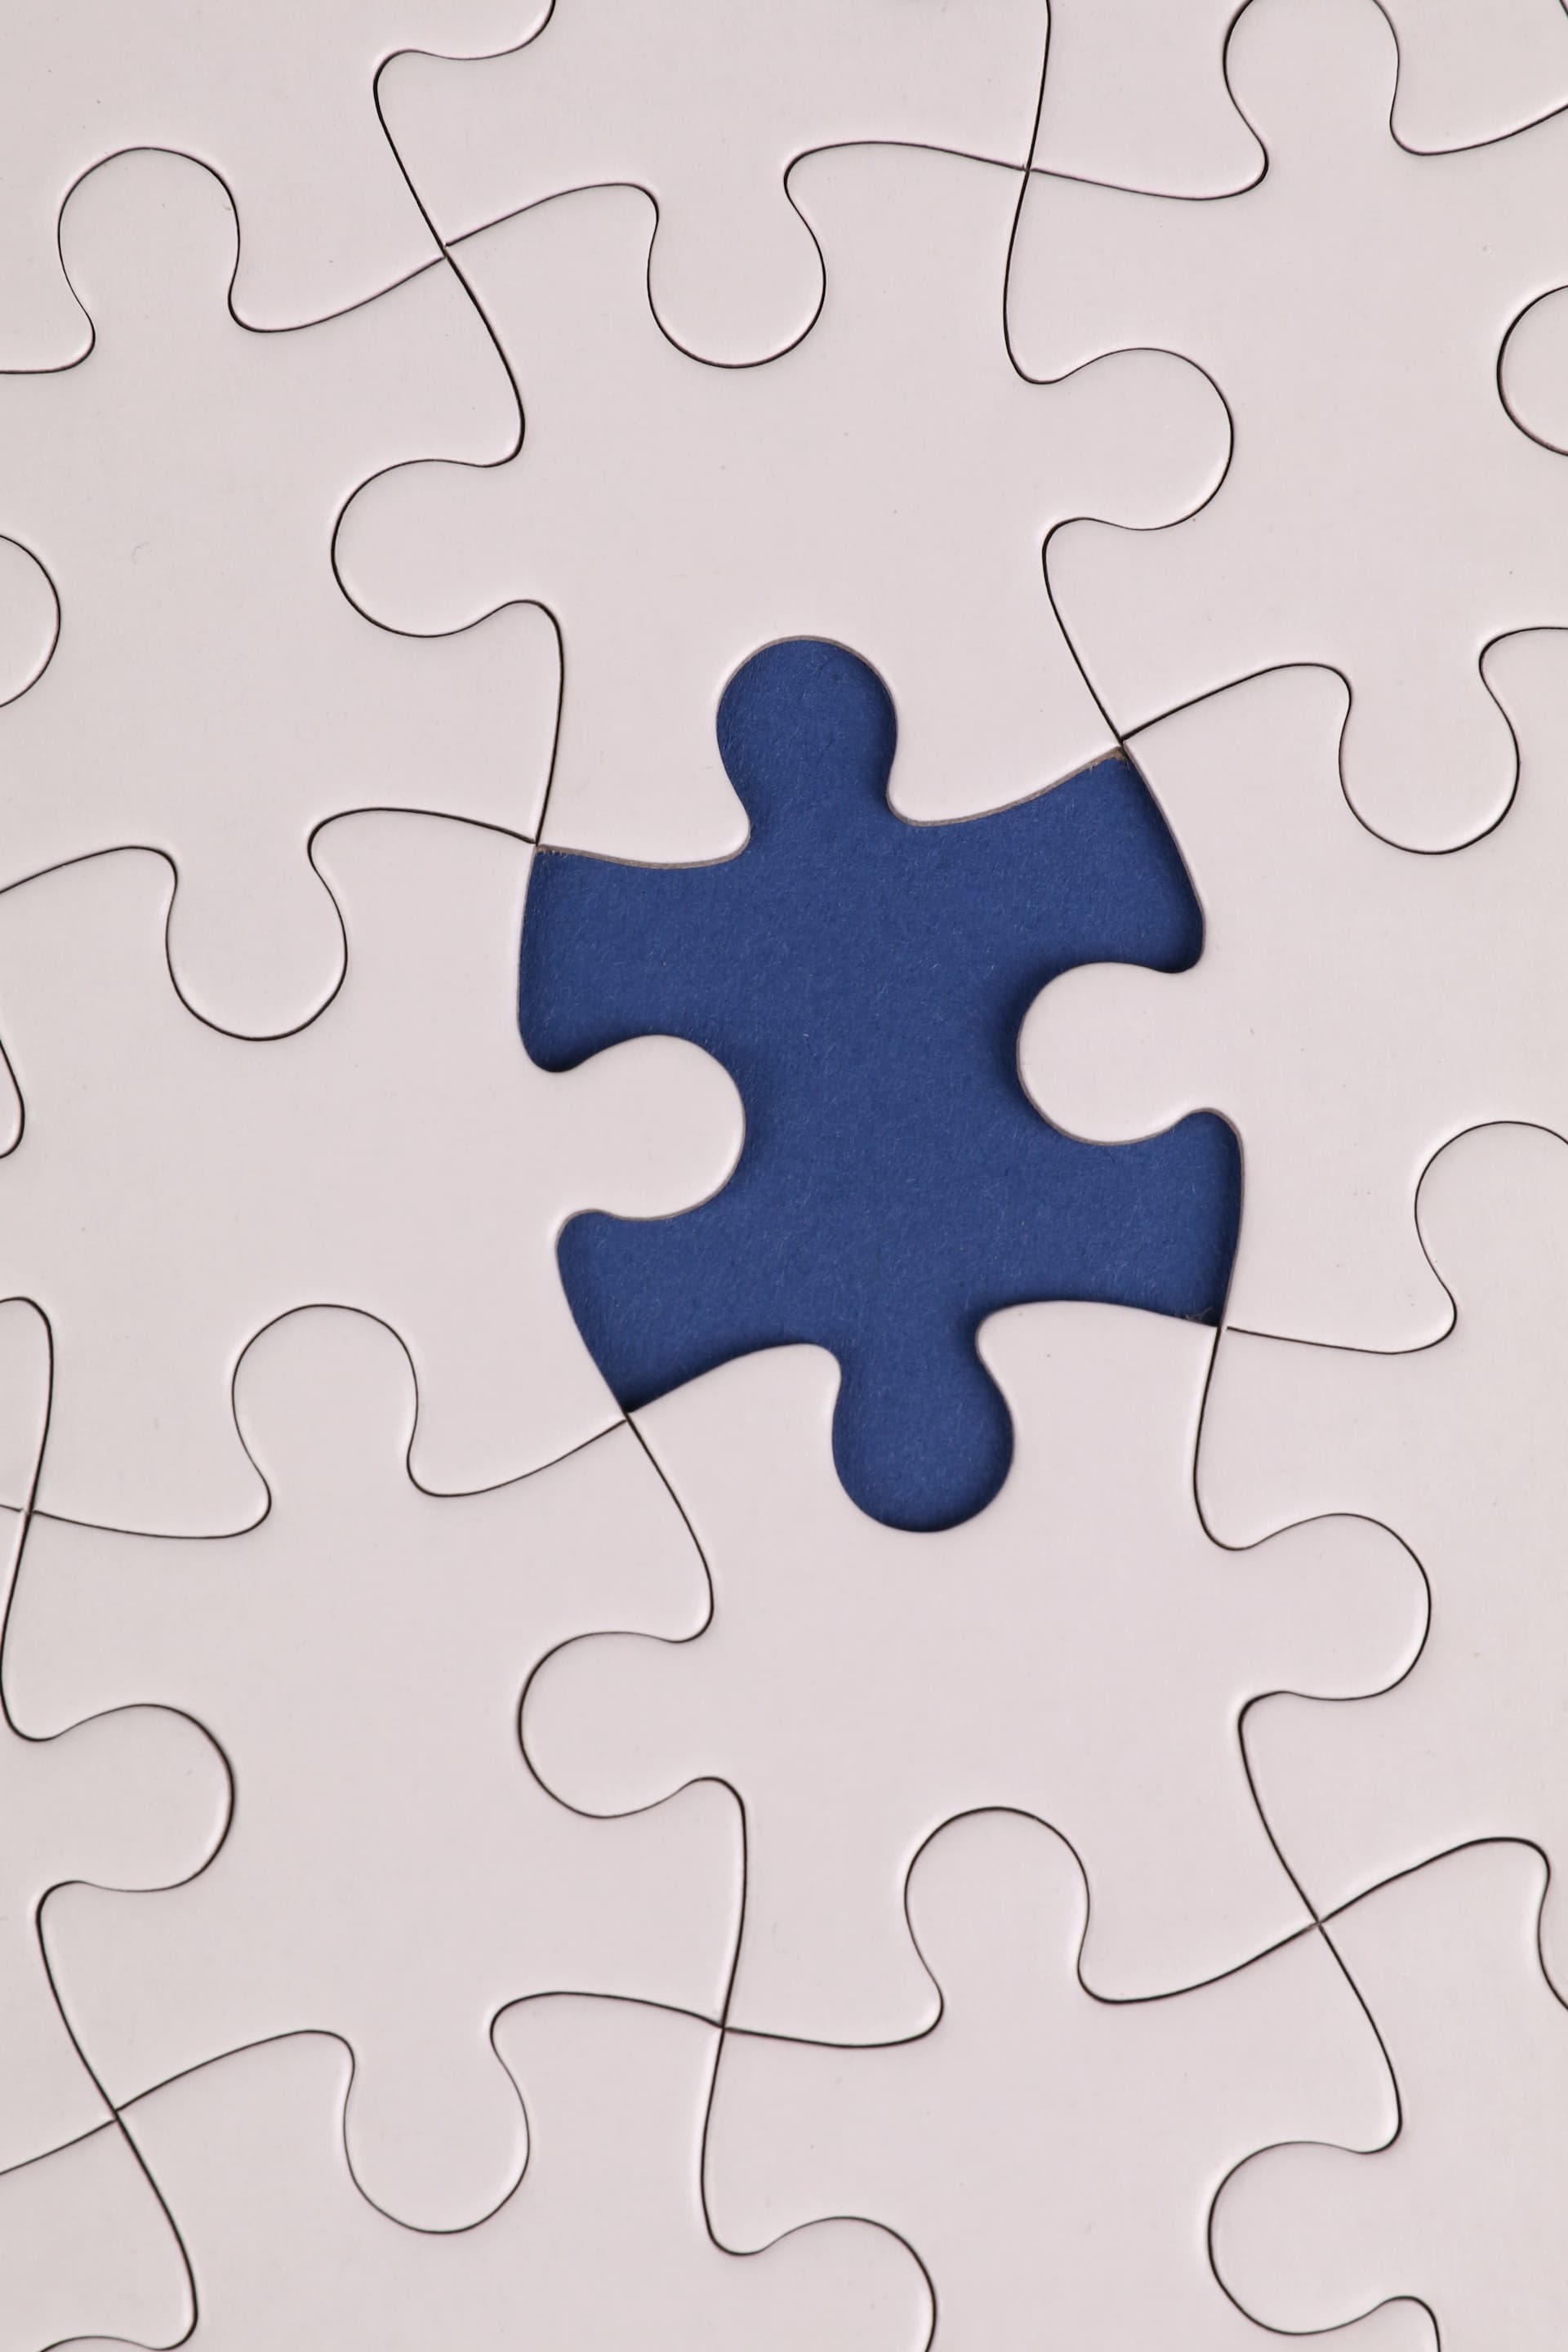 Mima Business the missing piece for your business